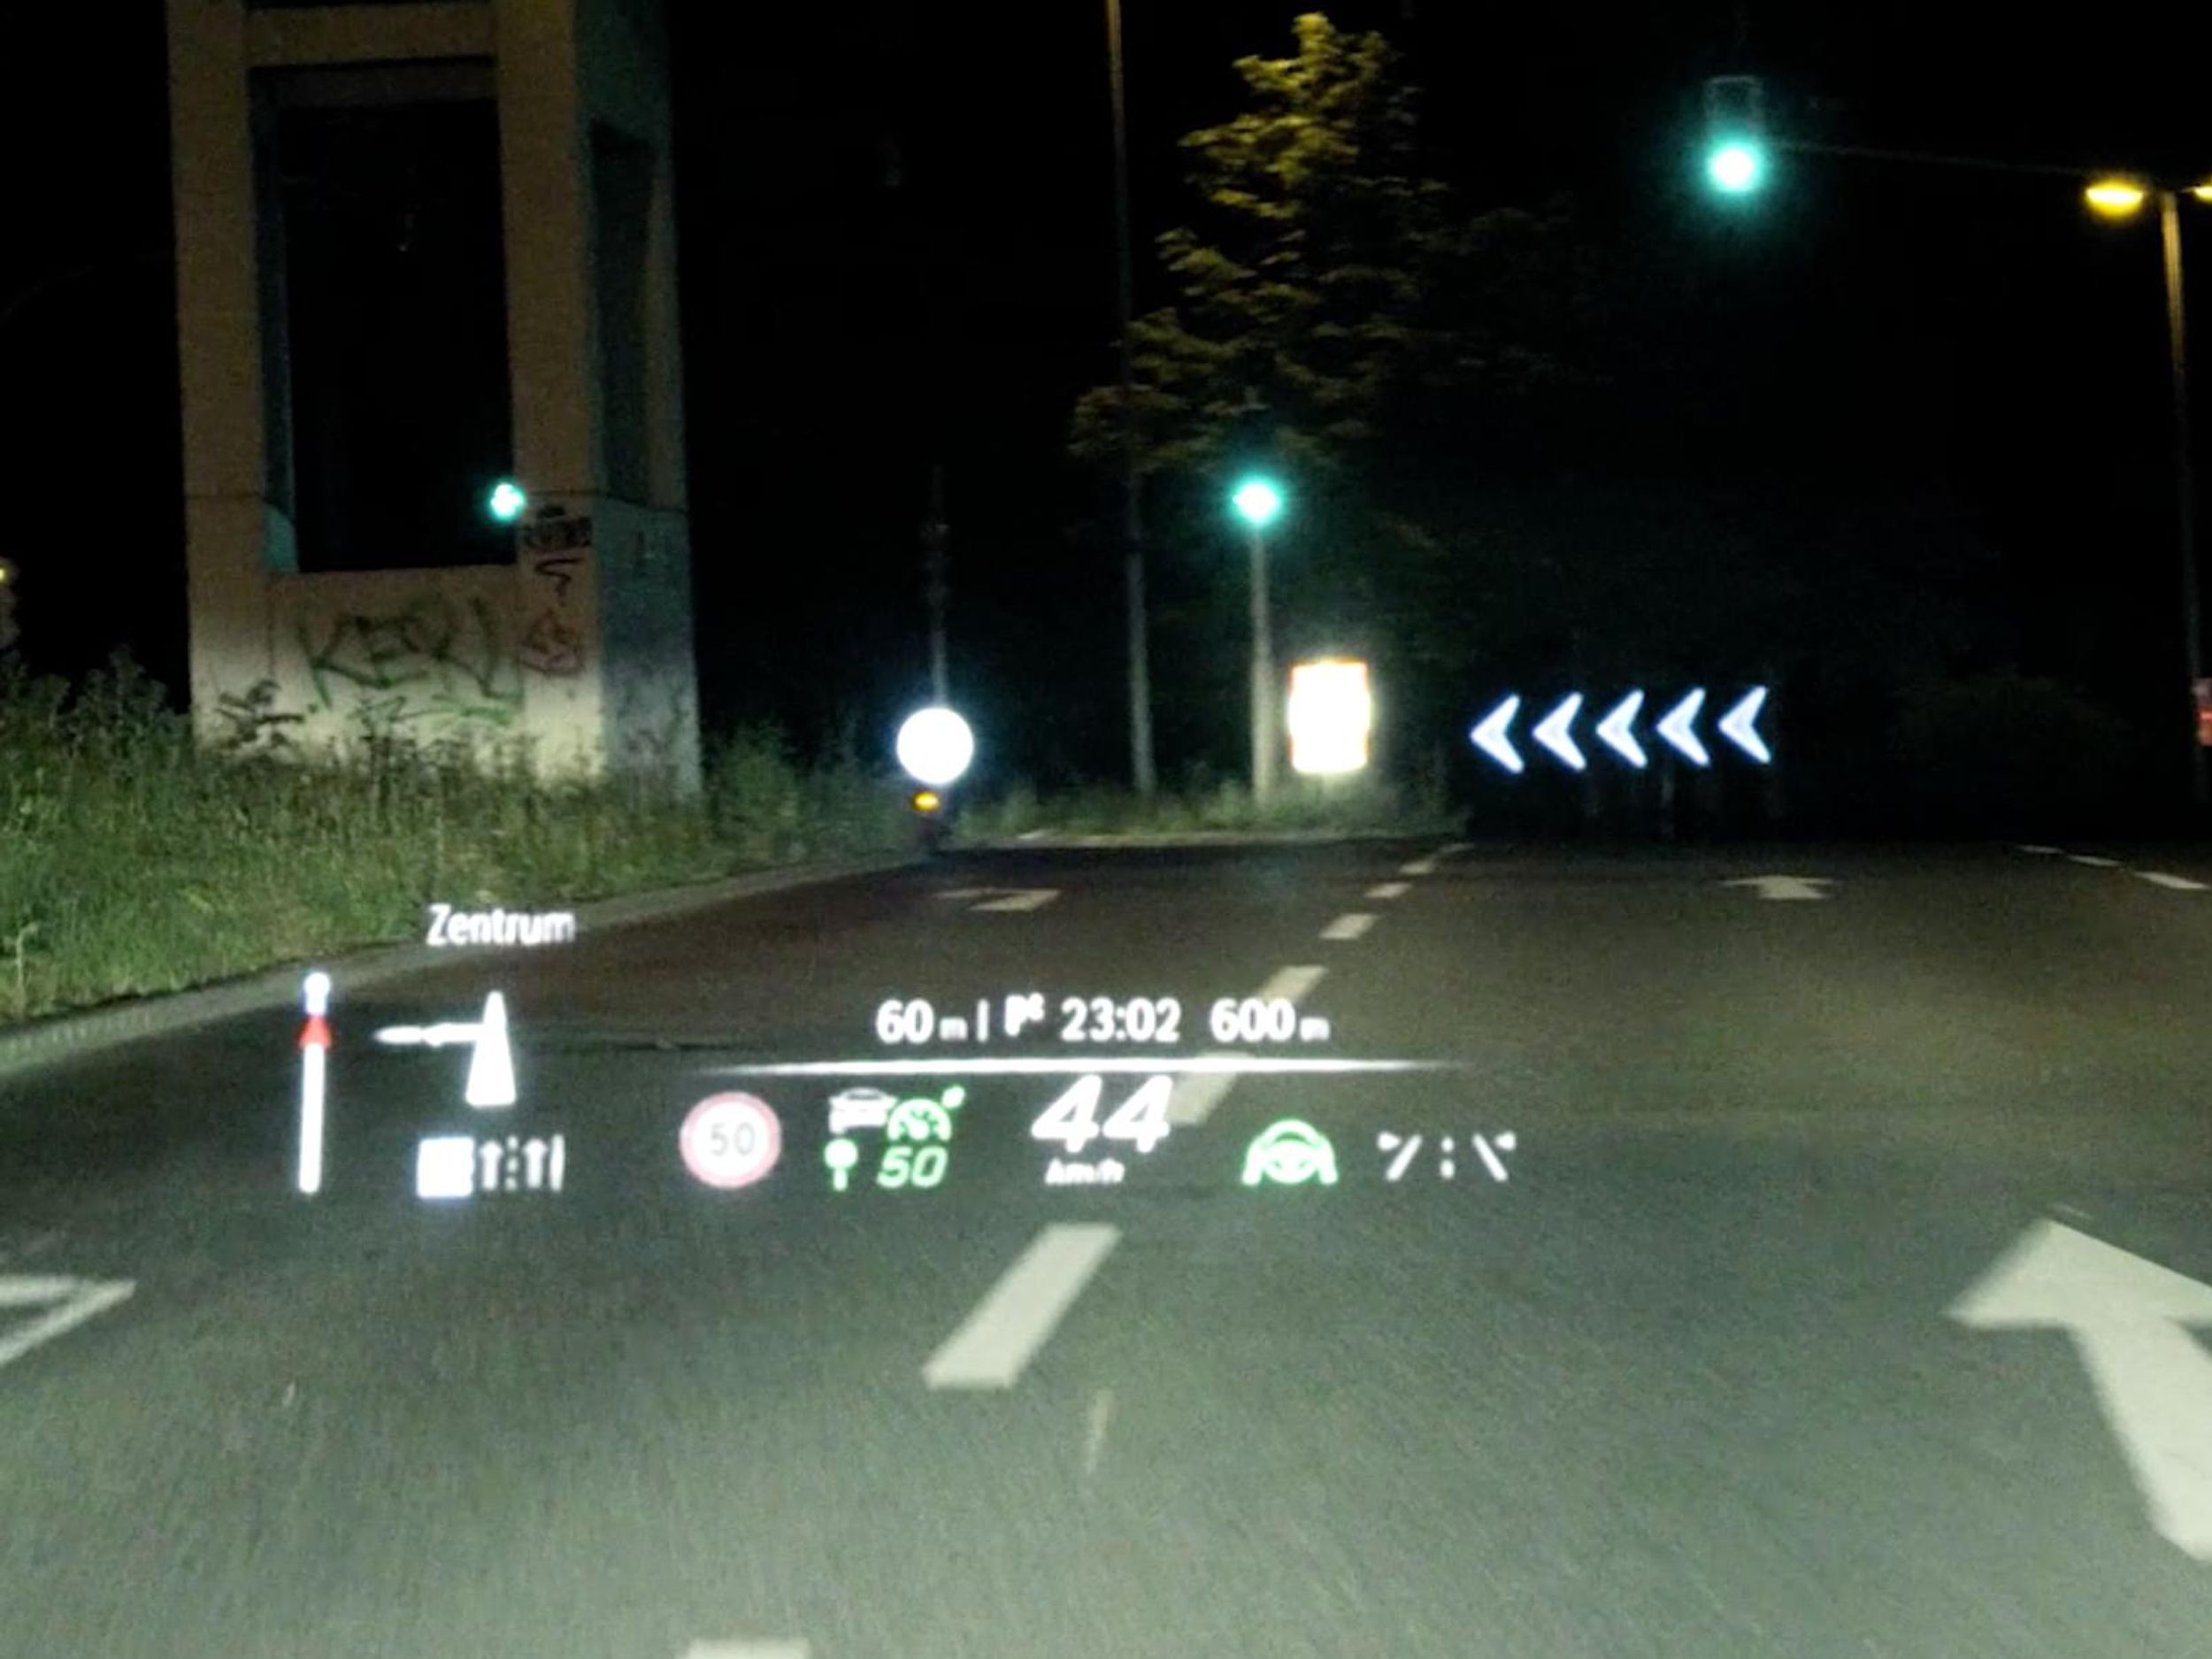 View of an intersection at night. An overlay shows arrows for turning left as well as car and road information.